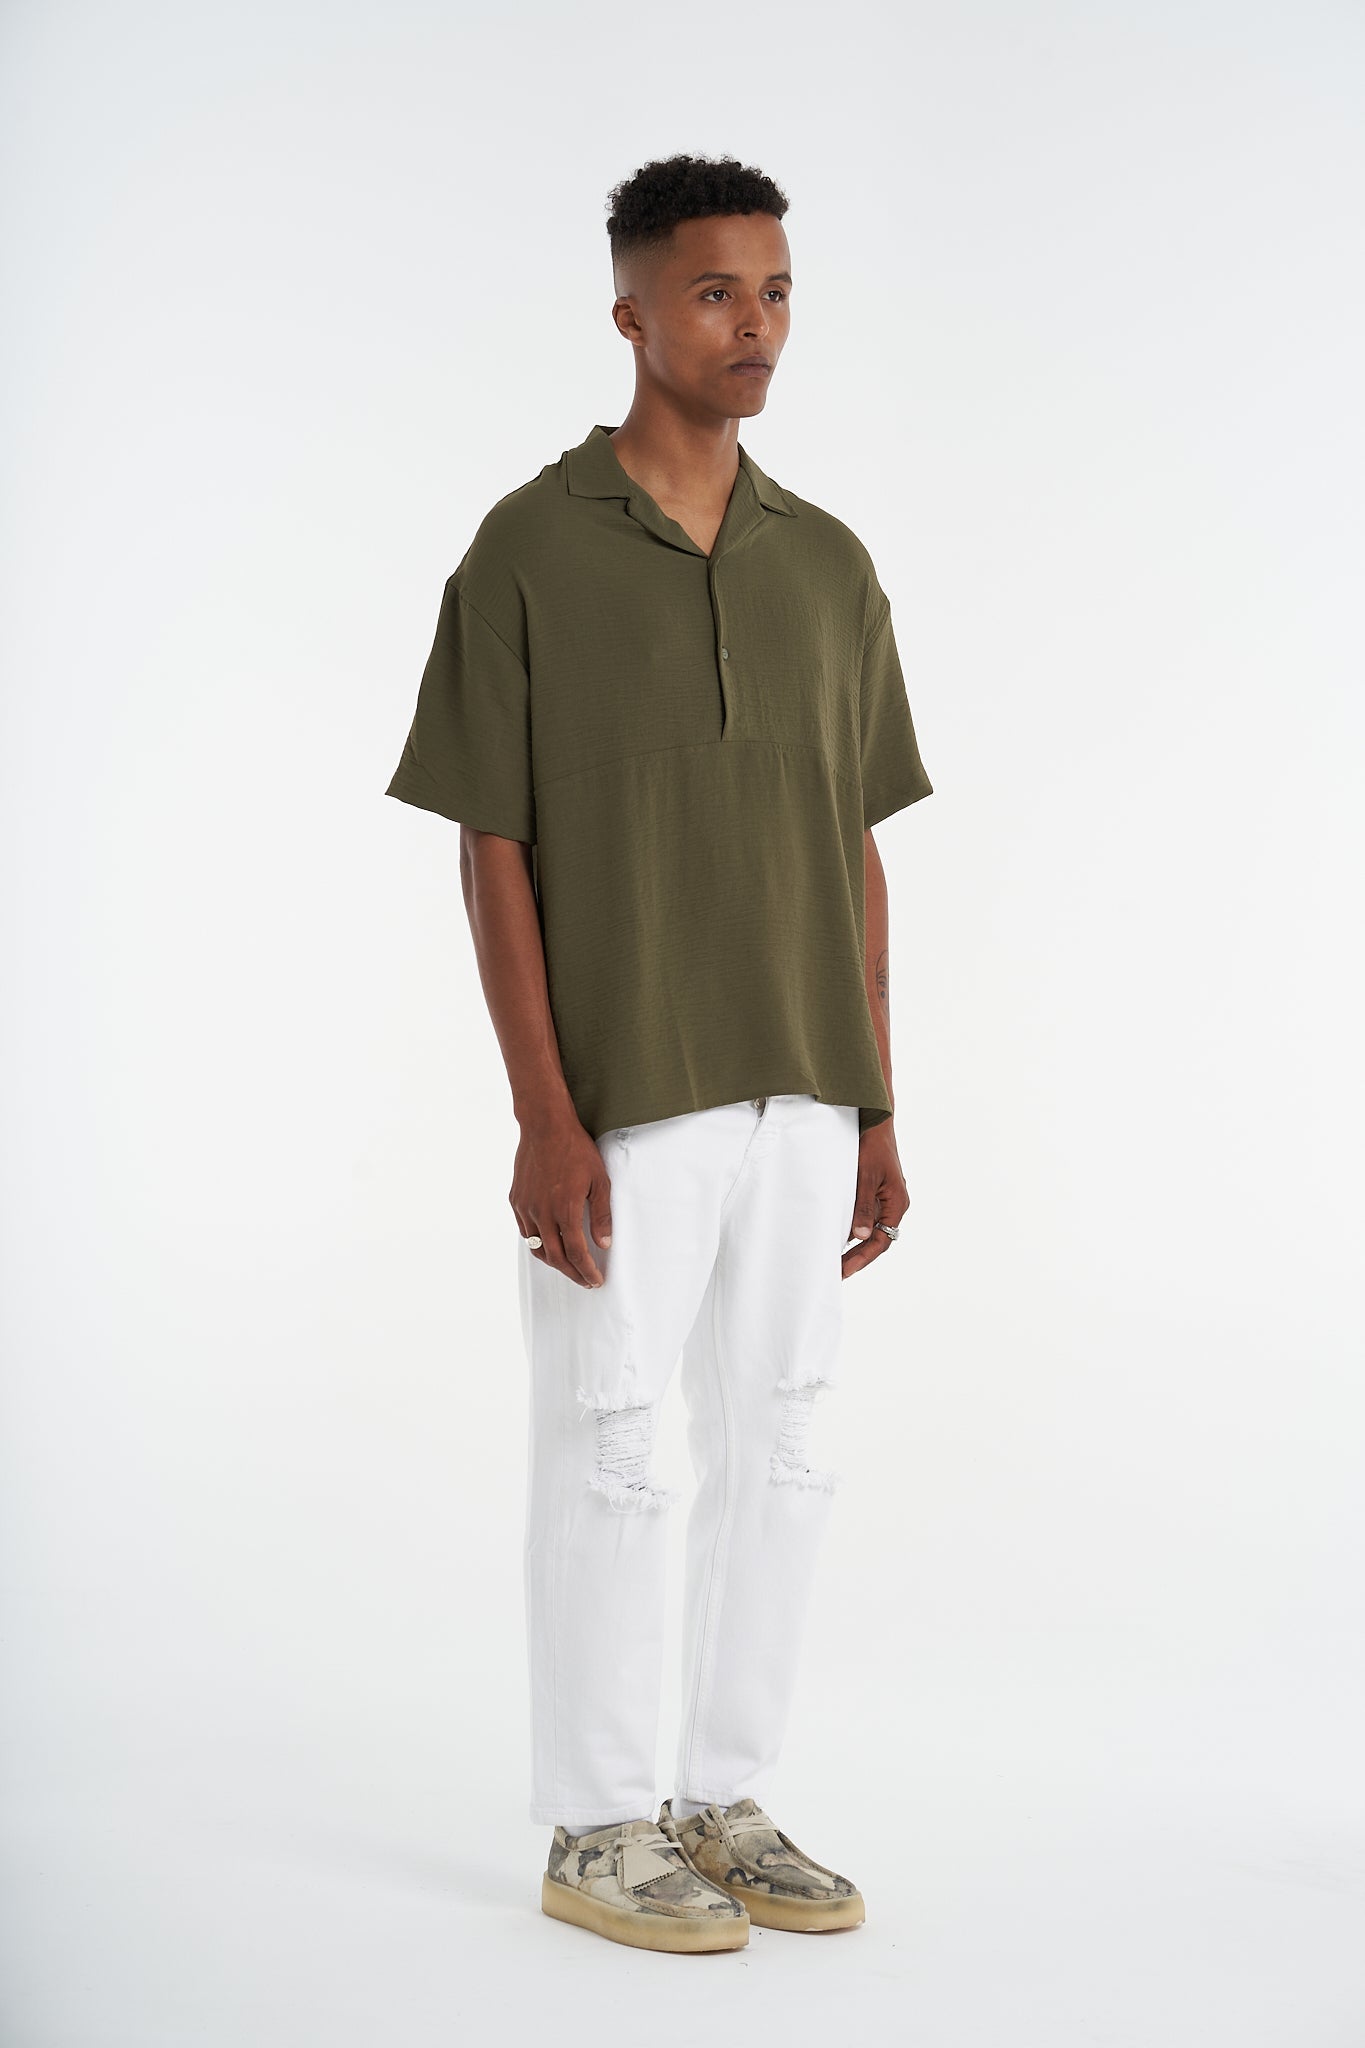 Wrinkled Textured Look Blouse Shirt - UNEFFECTED STUDIOS® - Shirts & Tops - UNEFFECTED STUDIOS®